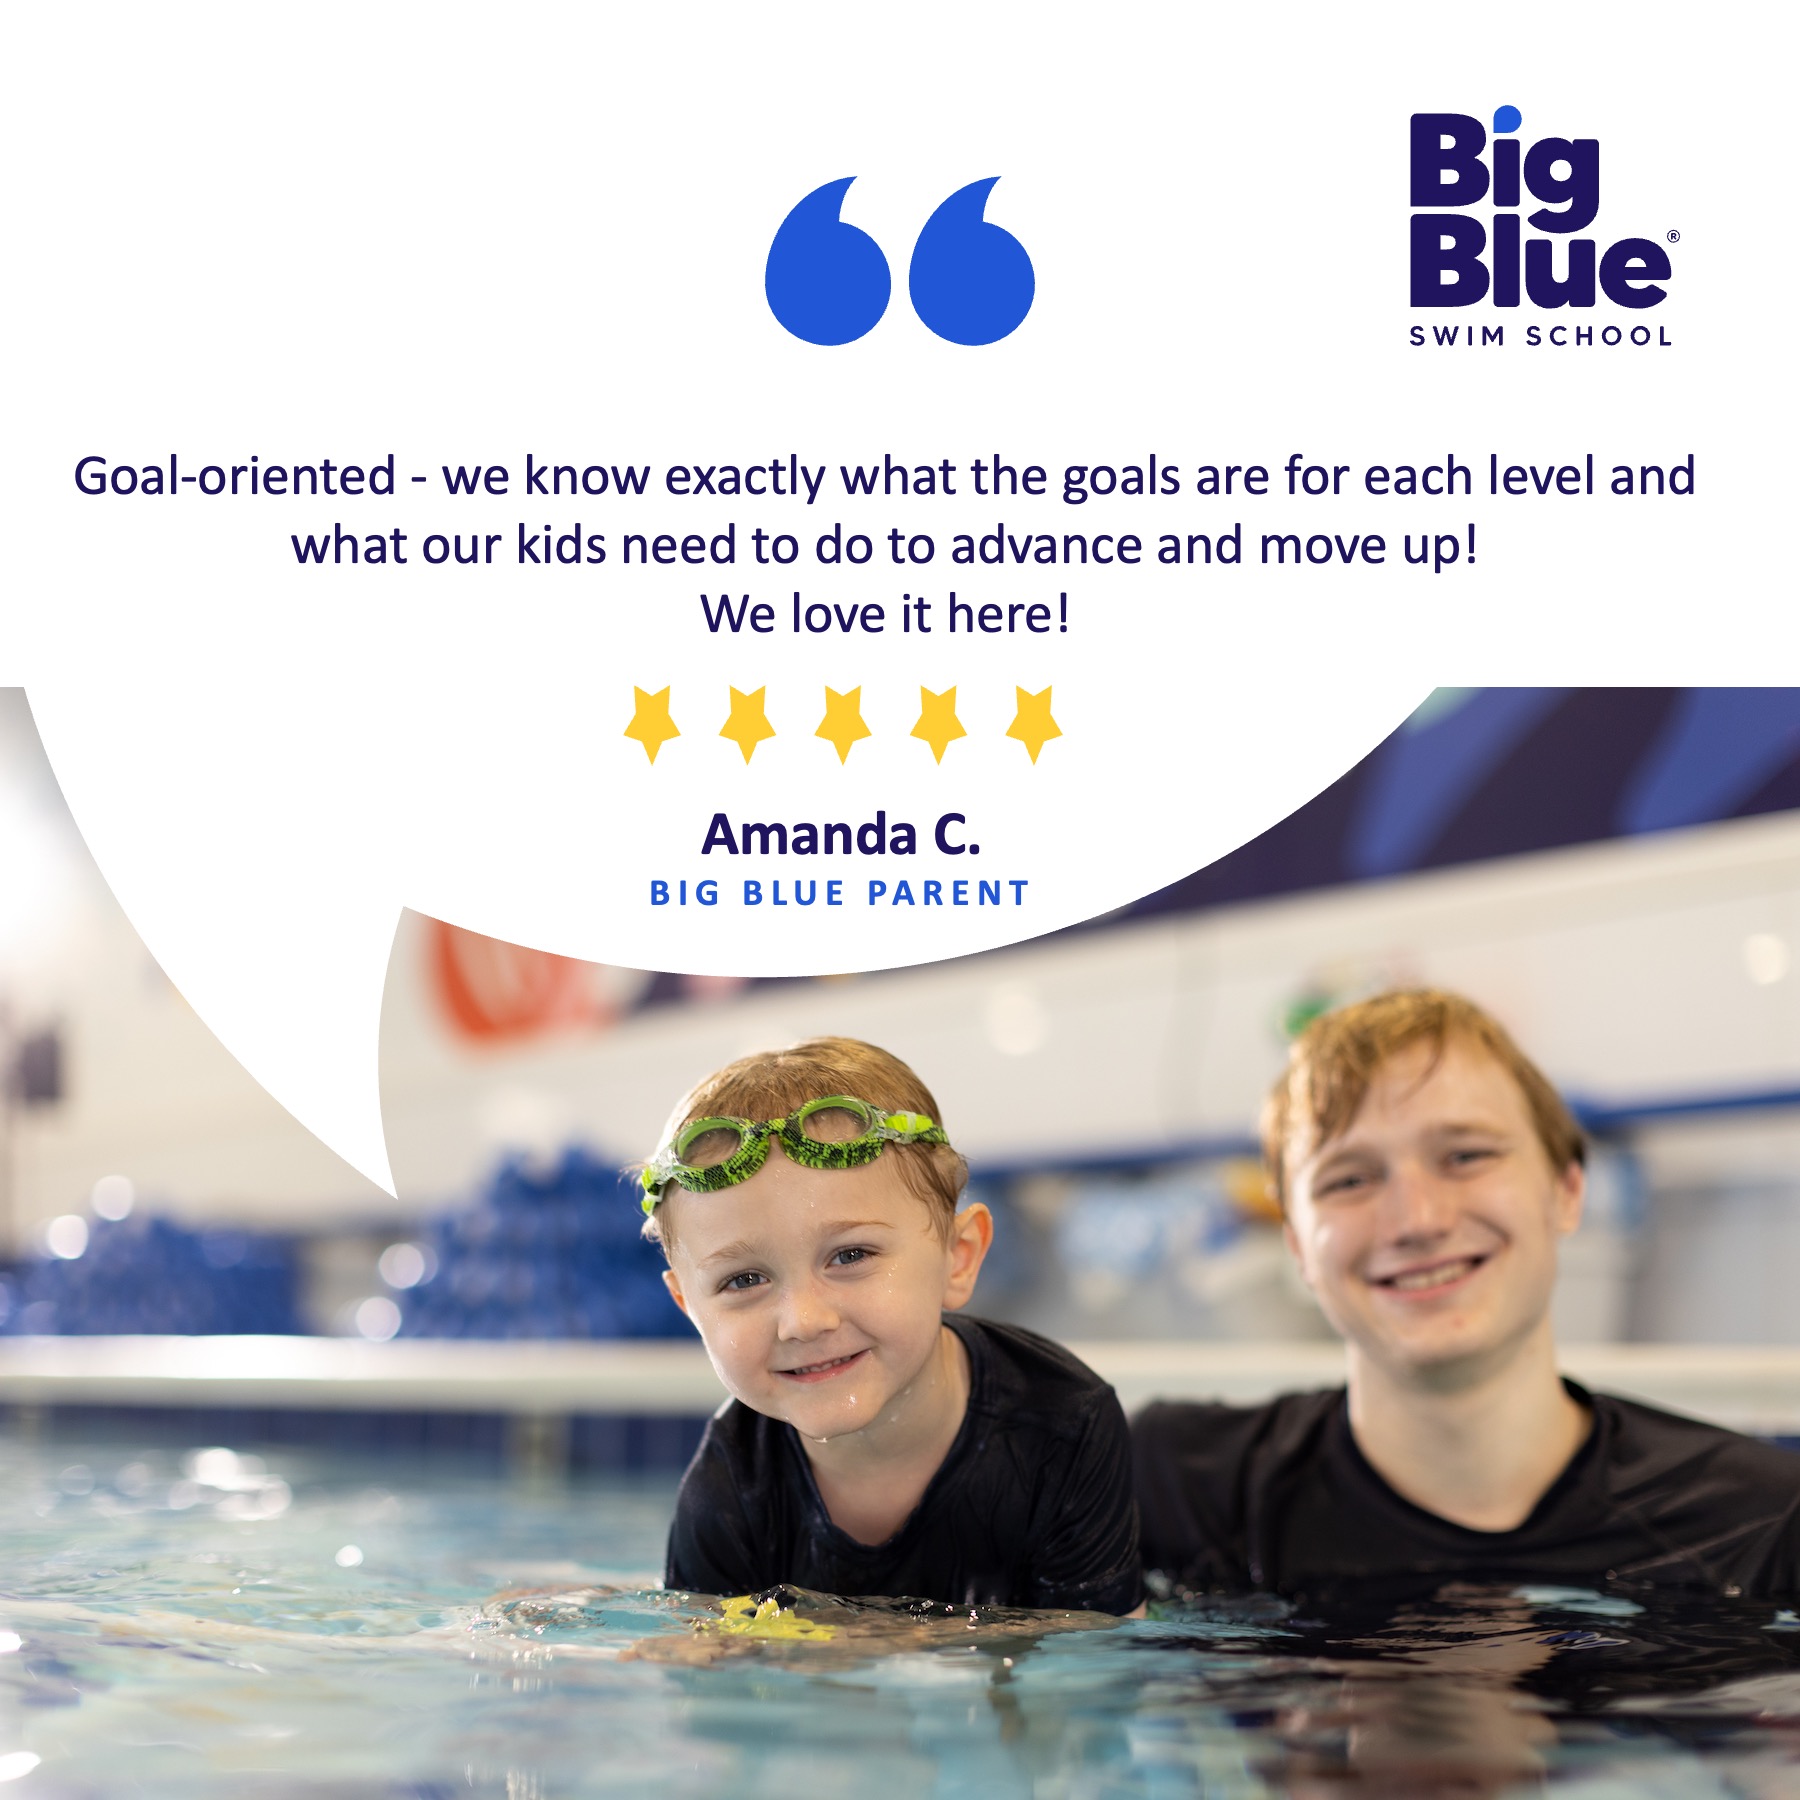 An ad for Big Blue Swim School with a child next to an instructor in the pool reads "Goal-oriented - we know exactly what the goals are for each level and what our kids need to do to advance and move up! We love it here!" -Amanda C.